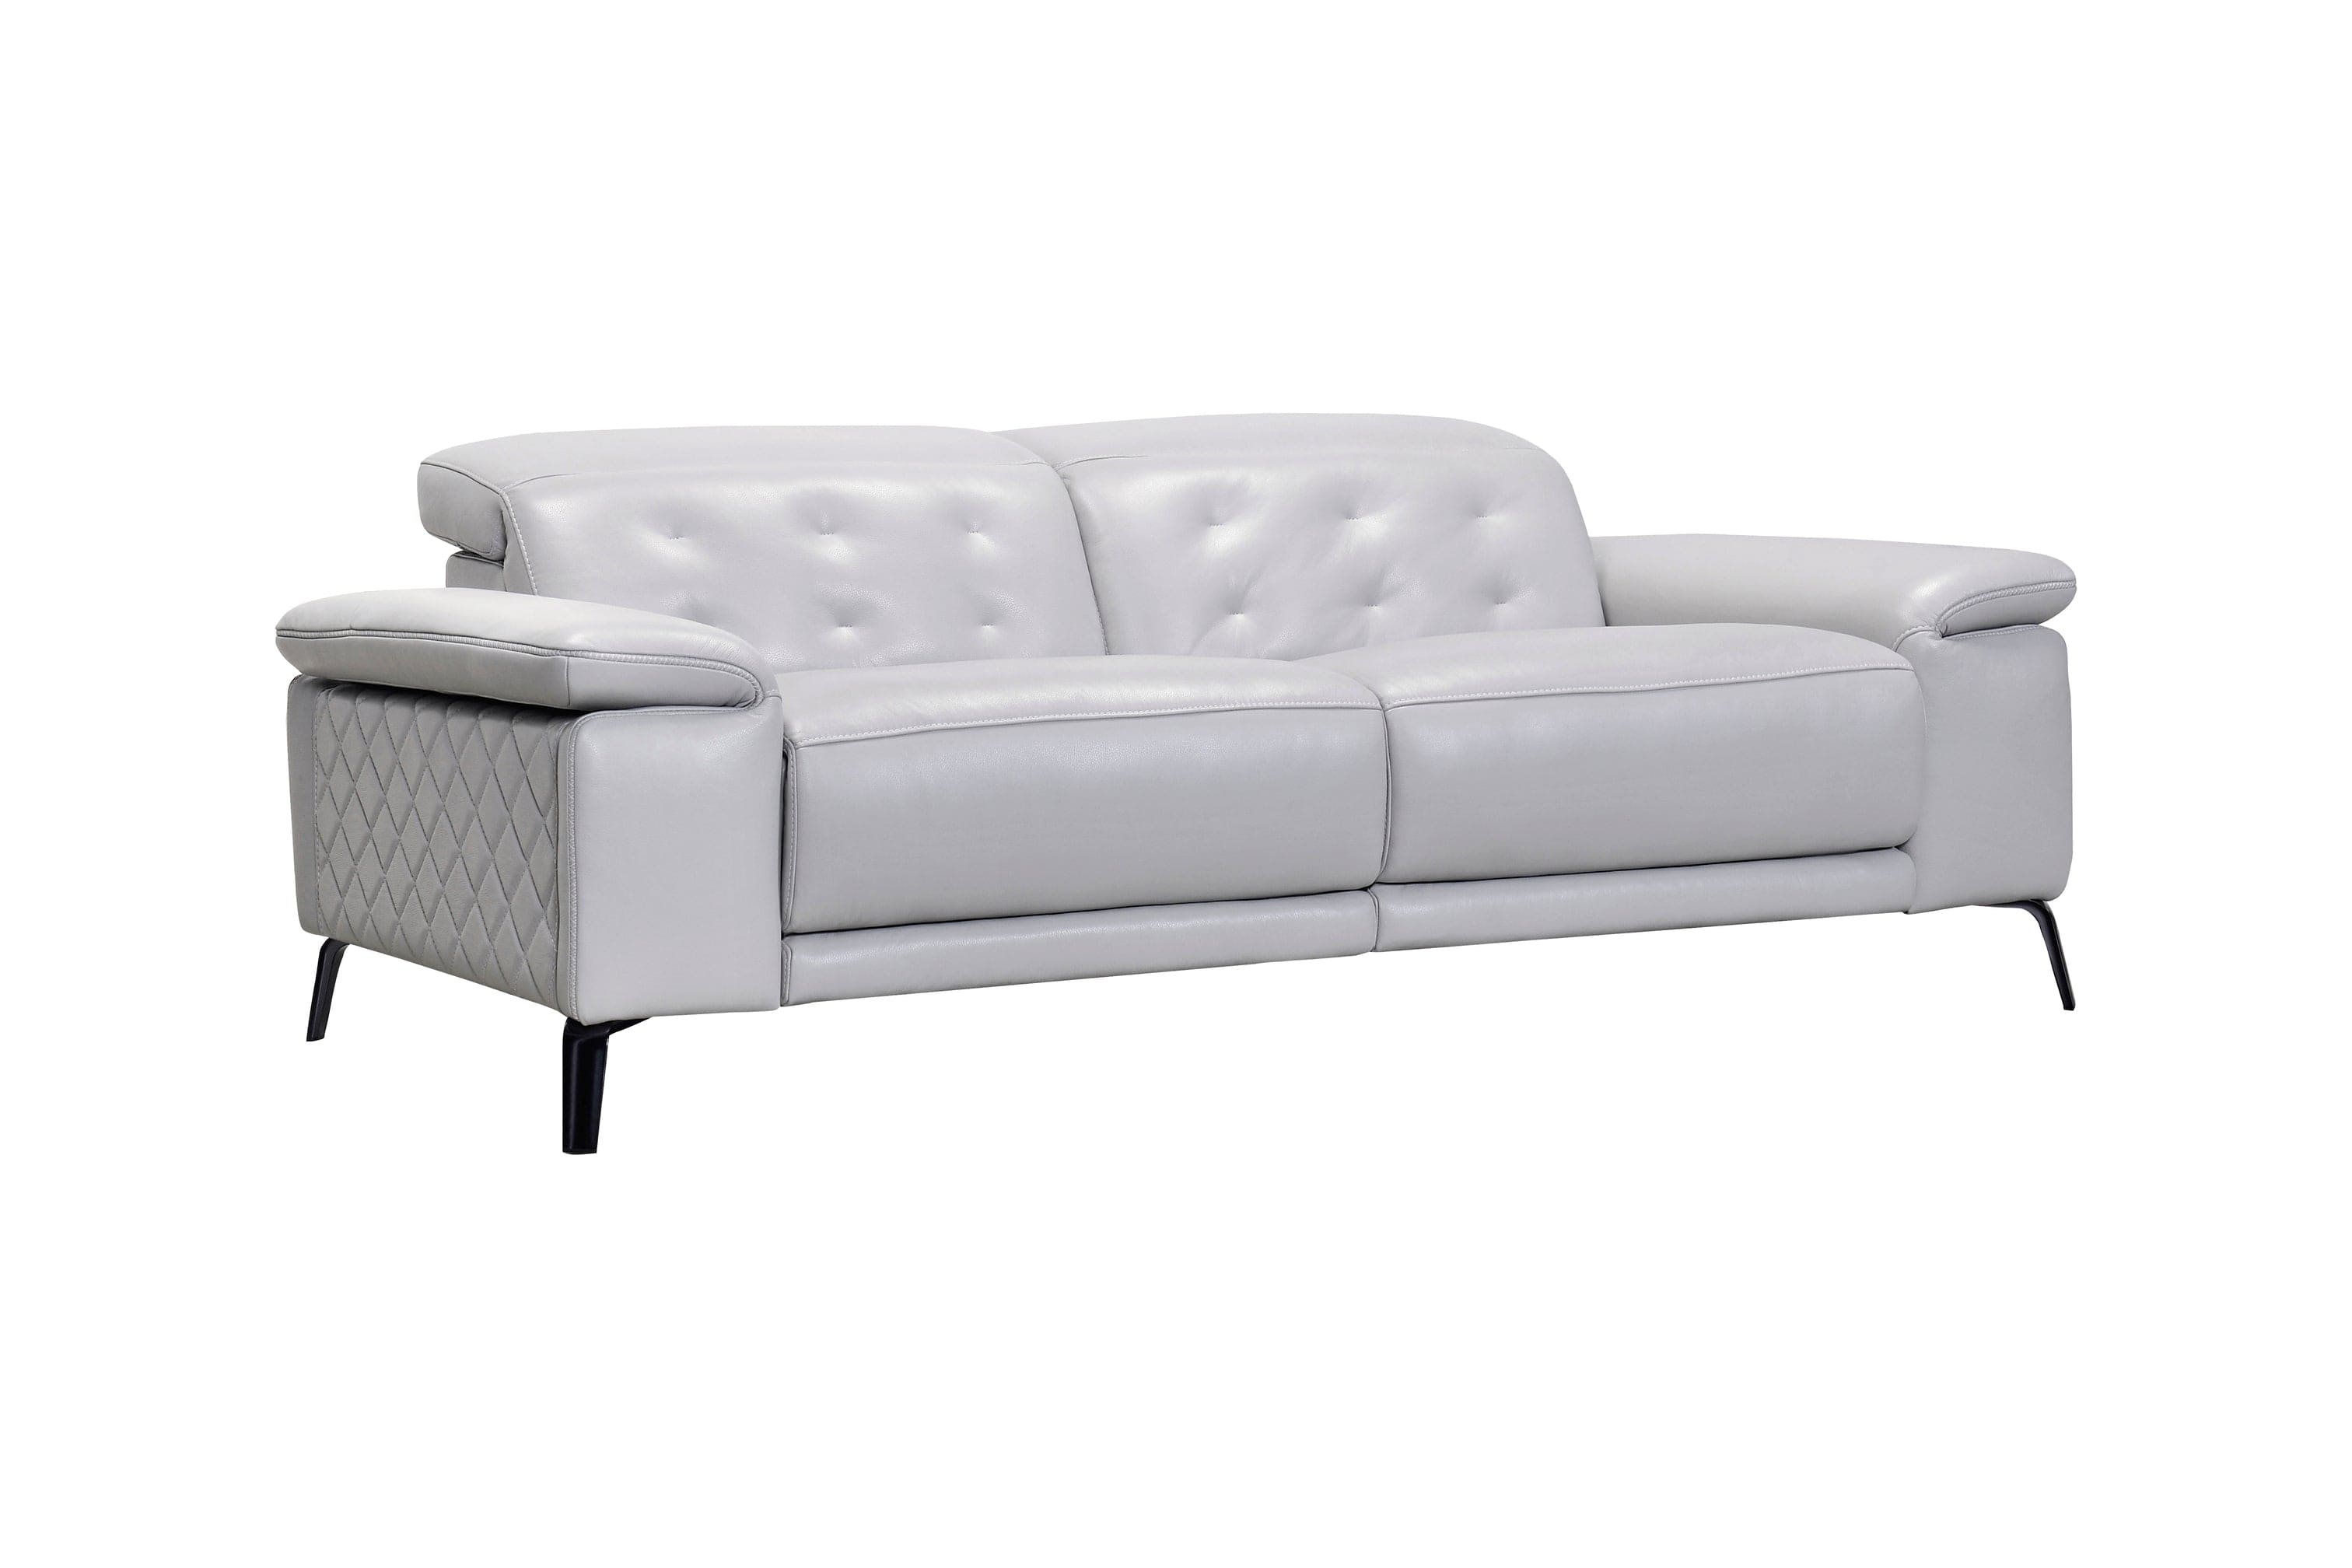 Elouise Sofa / Power Incliner + Adjustable Armrest + Headrest / Full Leather Casa Concetto Singapore